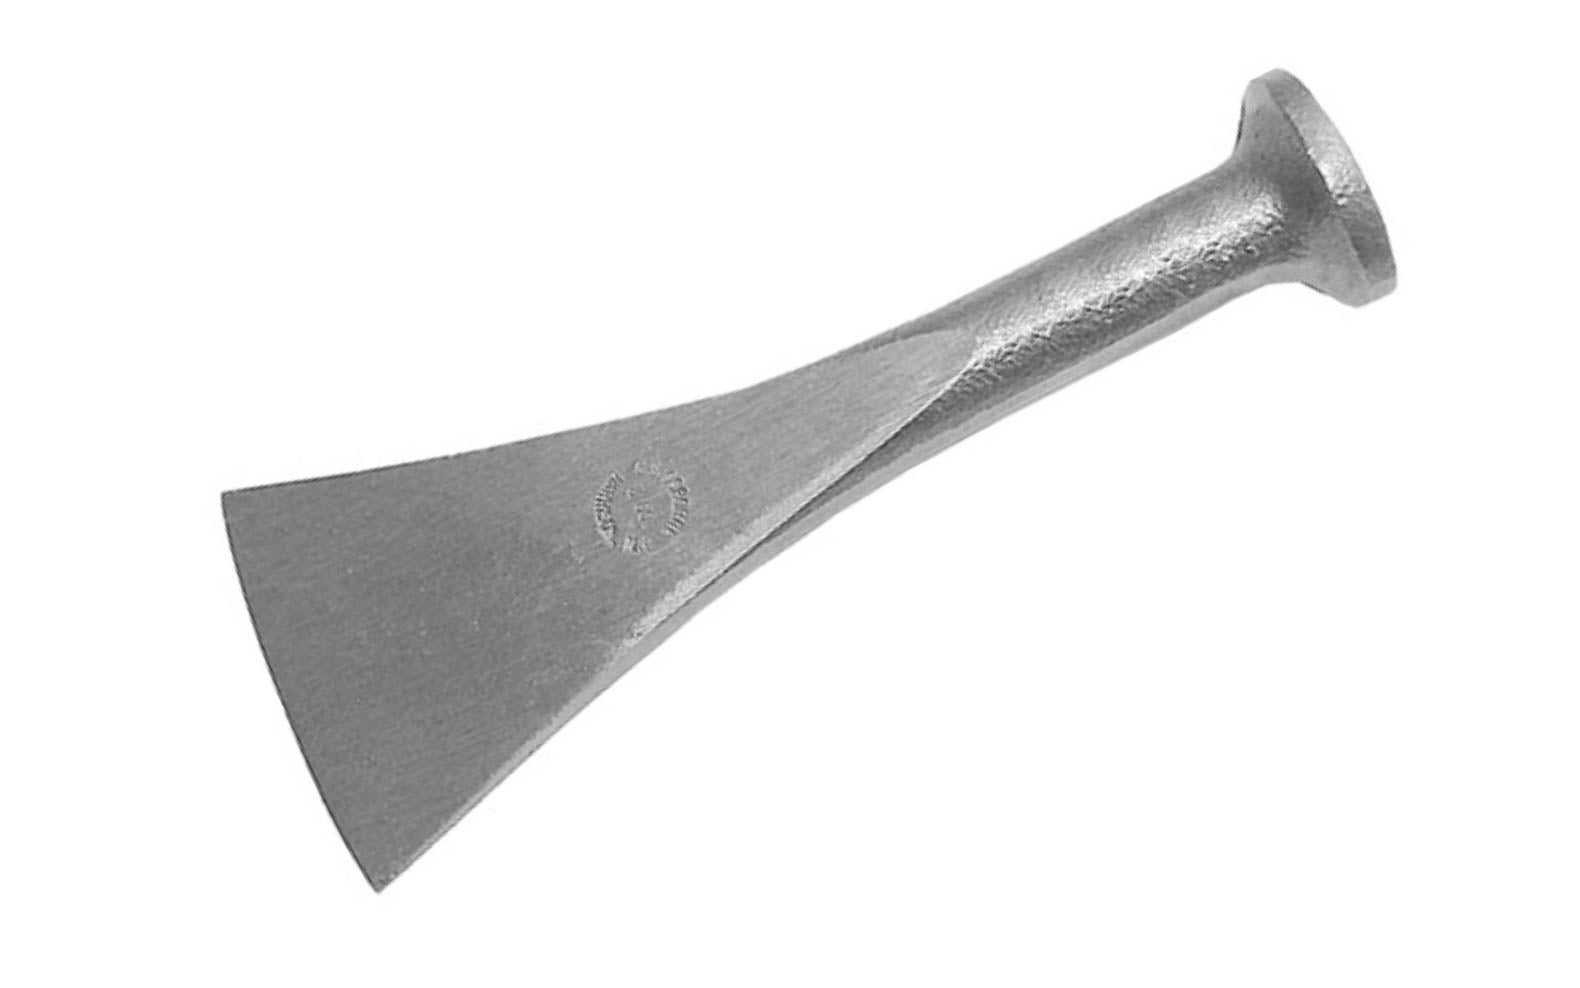 C.S. Osborne Caulking Iron No. 273 ~ Size 0 ~ Designed for driving oakum or cotton in the seams between planks for boat builders ~ This iron has a 1/16" thickness of edge and  is made of strong durable cast malleable iron ~ Made in USA ~ 096685680941